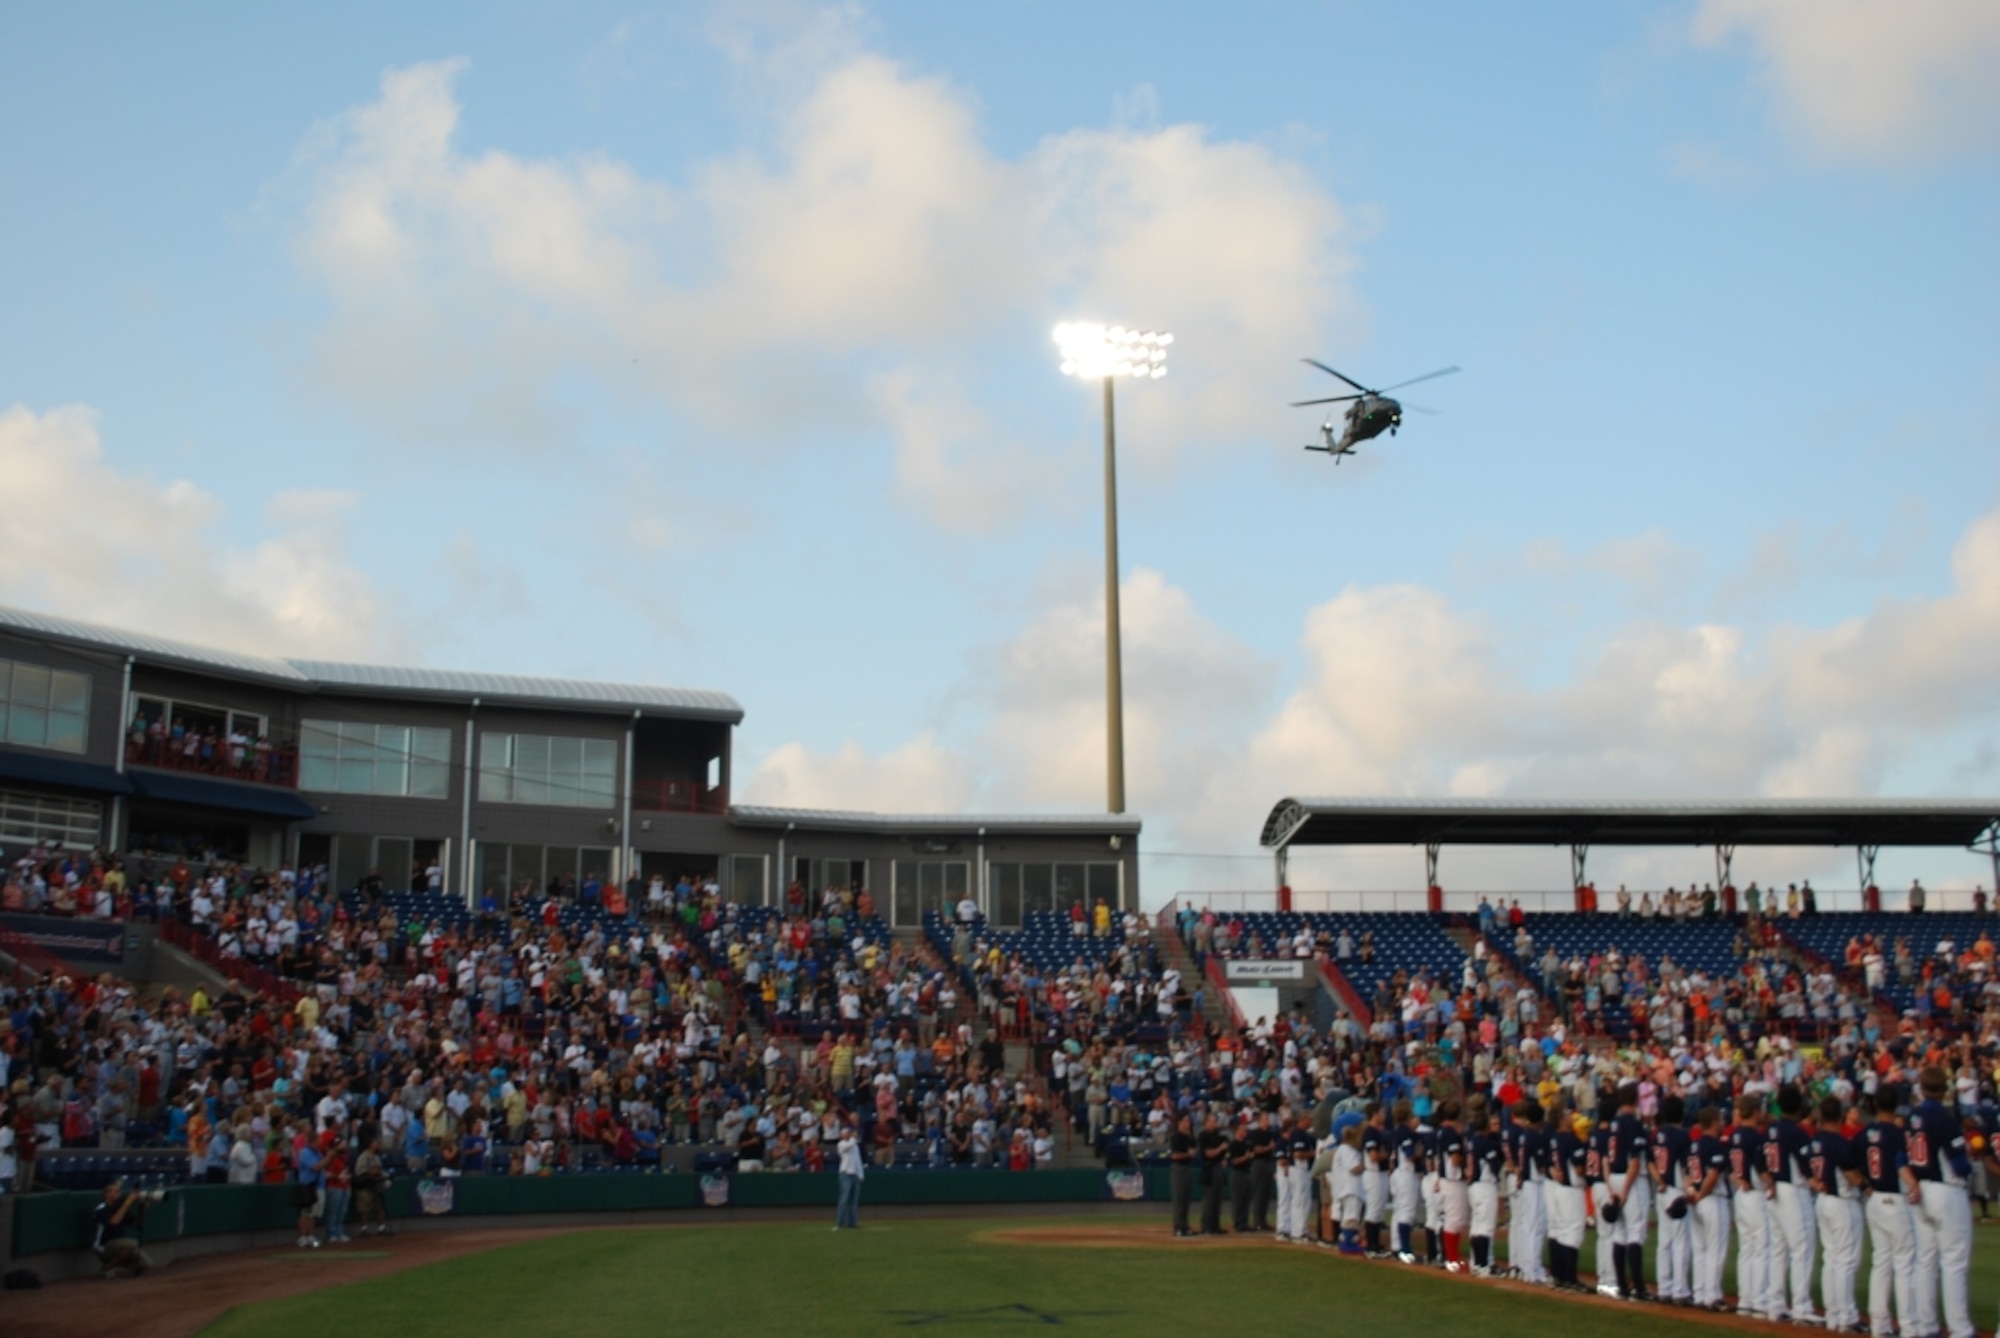 920 helicpoter does fly over as national anthem comes to and end…